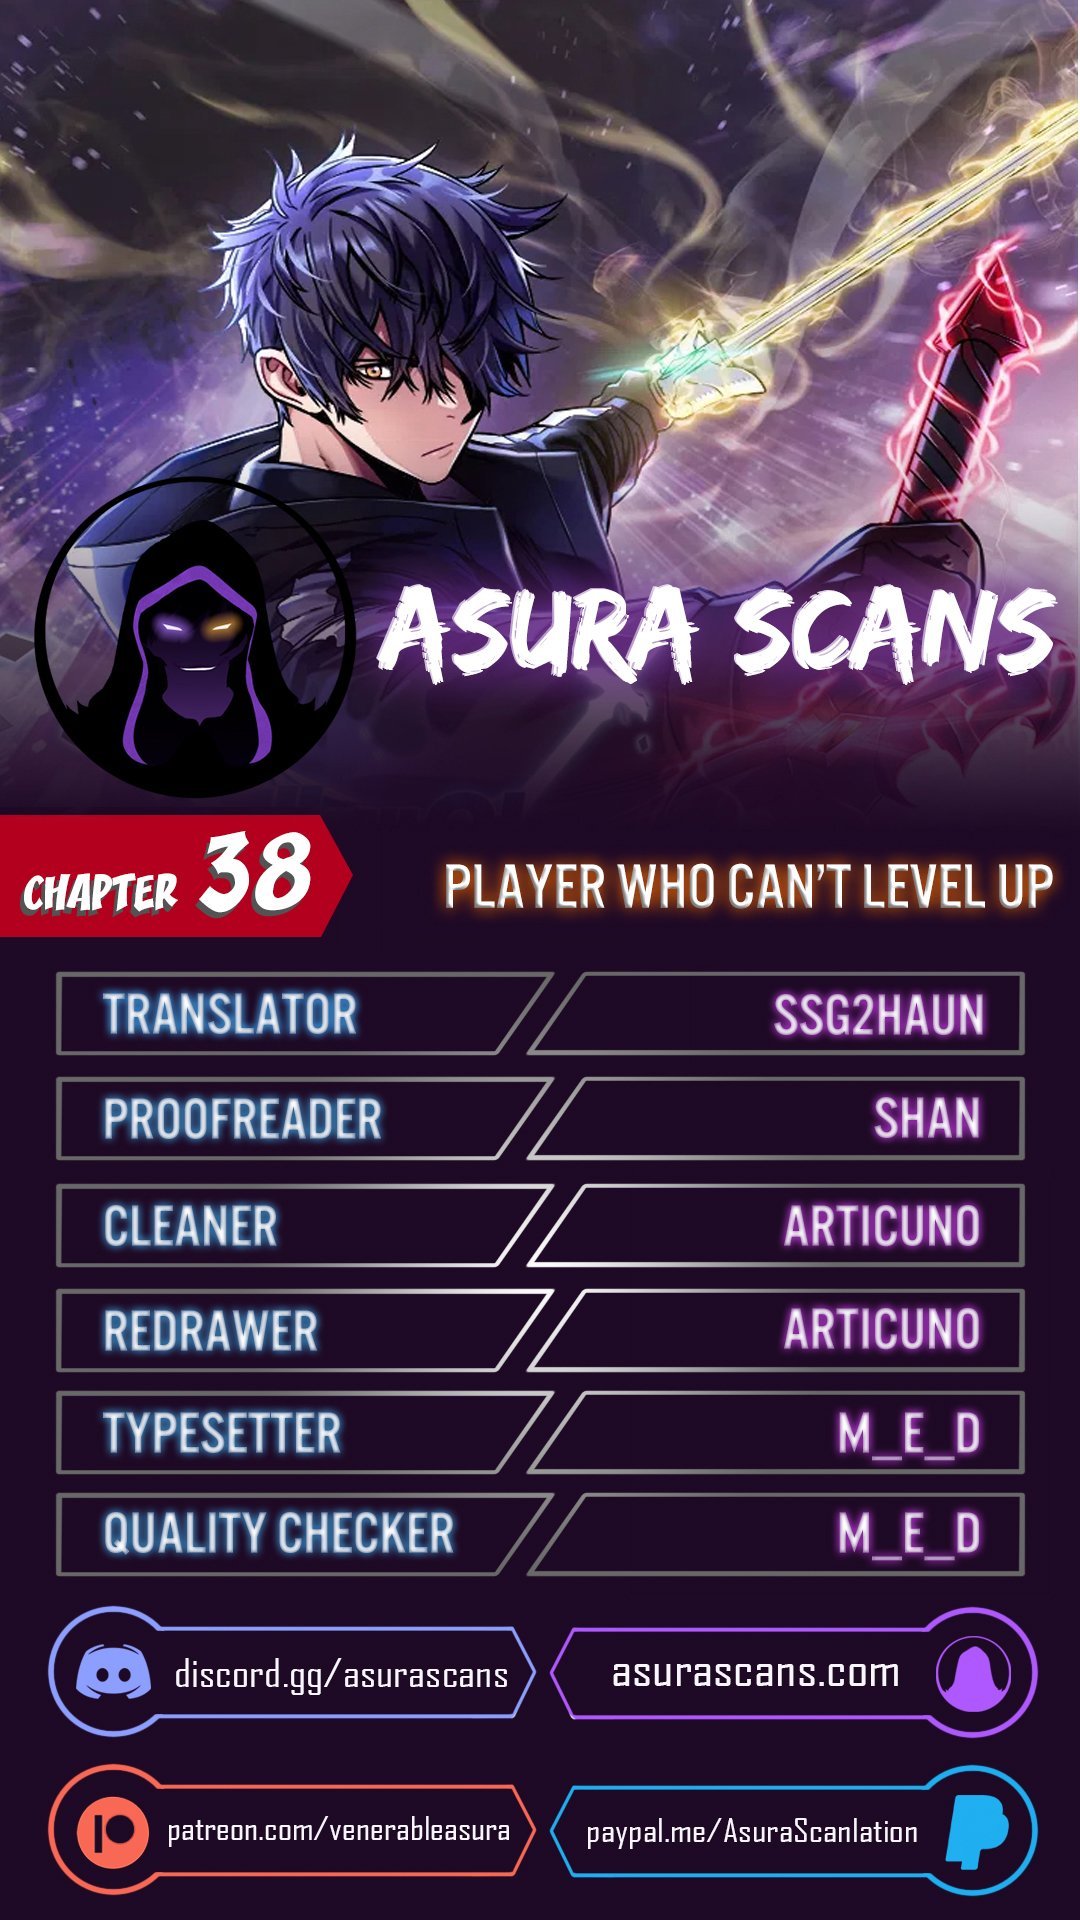 player-who-cant-level-up-chap-38-0